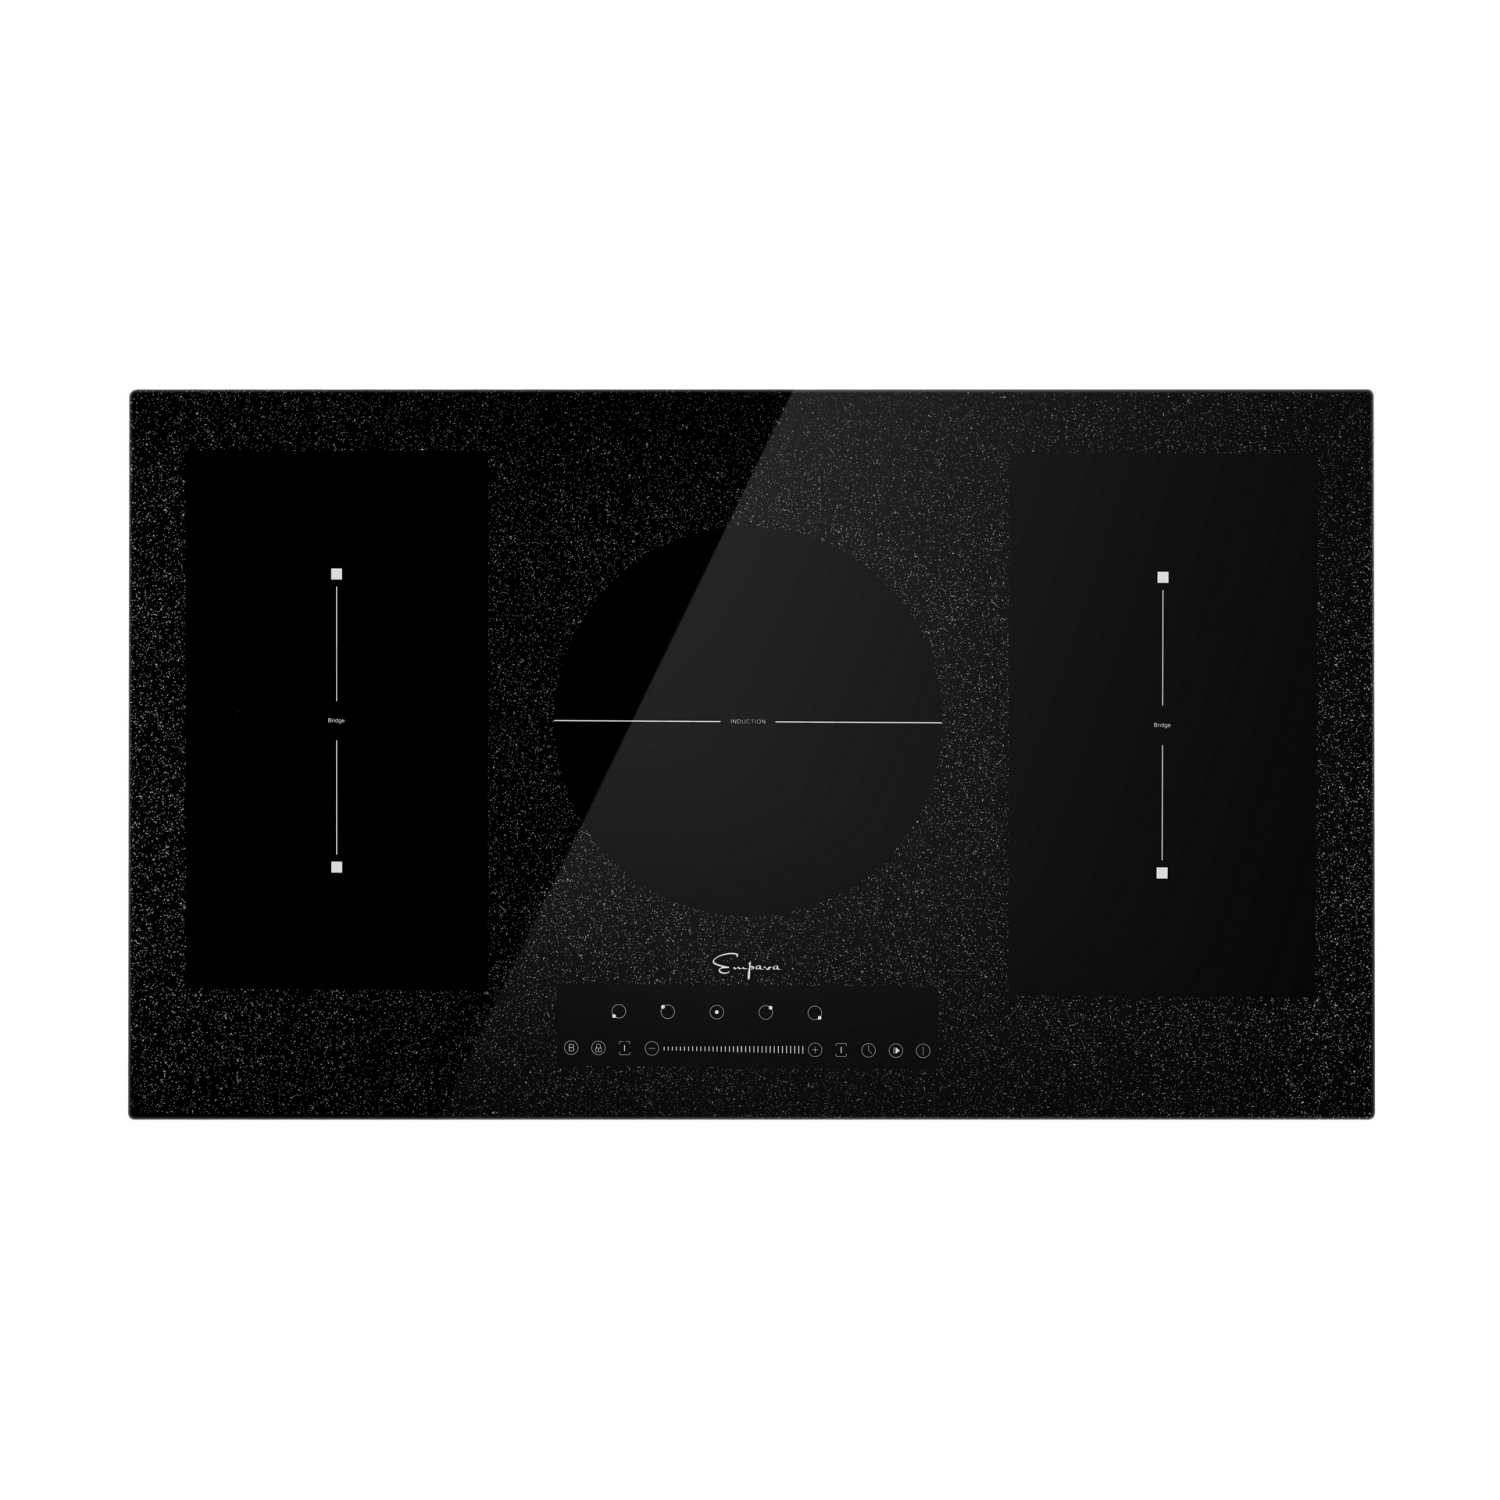 Empava 36 in Electric Stove Induction Cooktop with 5 Booster Burners Including 2 Flexi Bridge Element Smooth Surface in Black